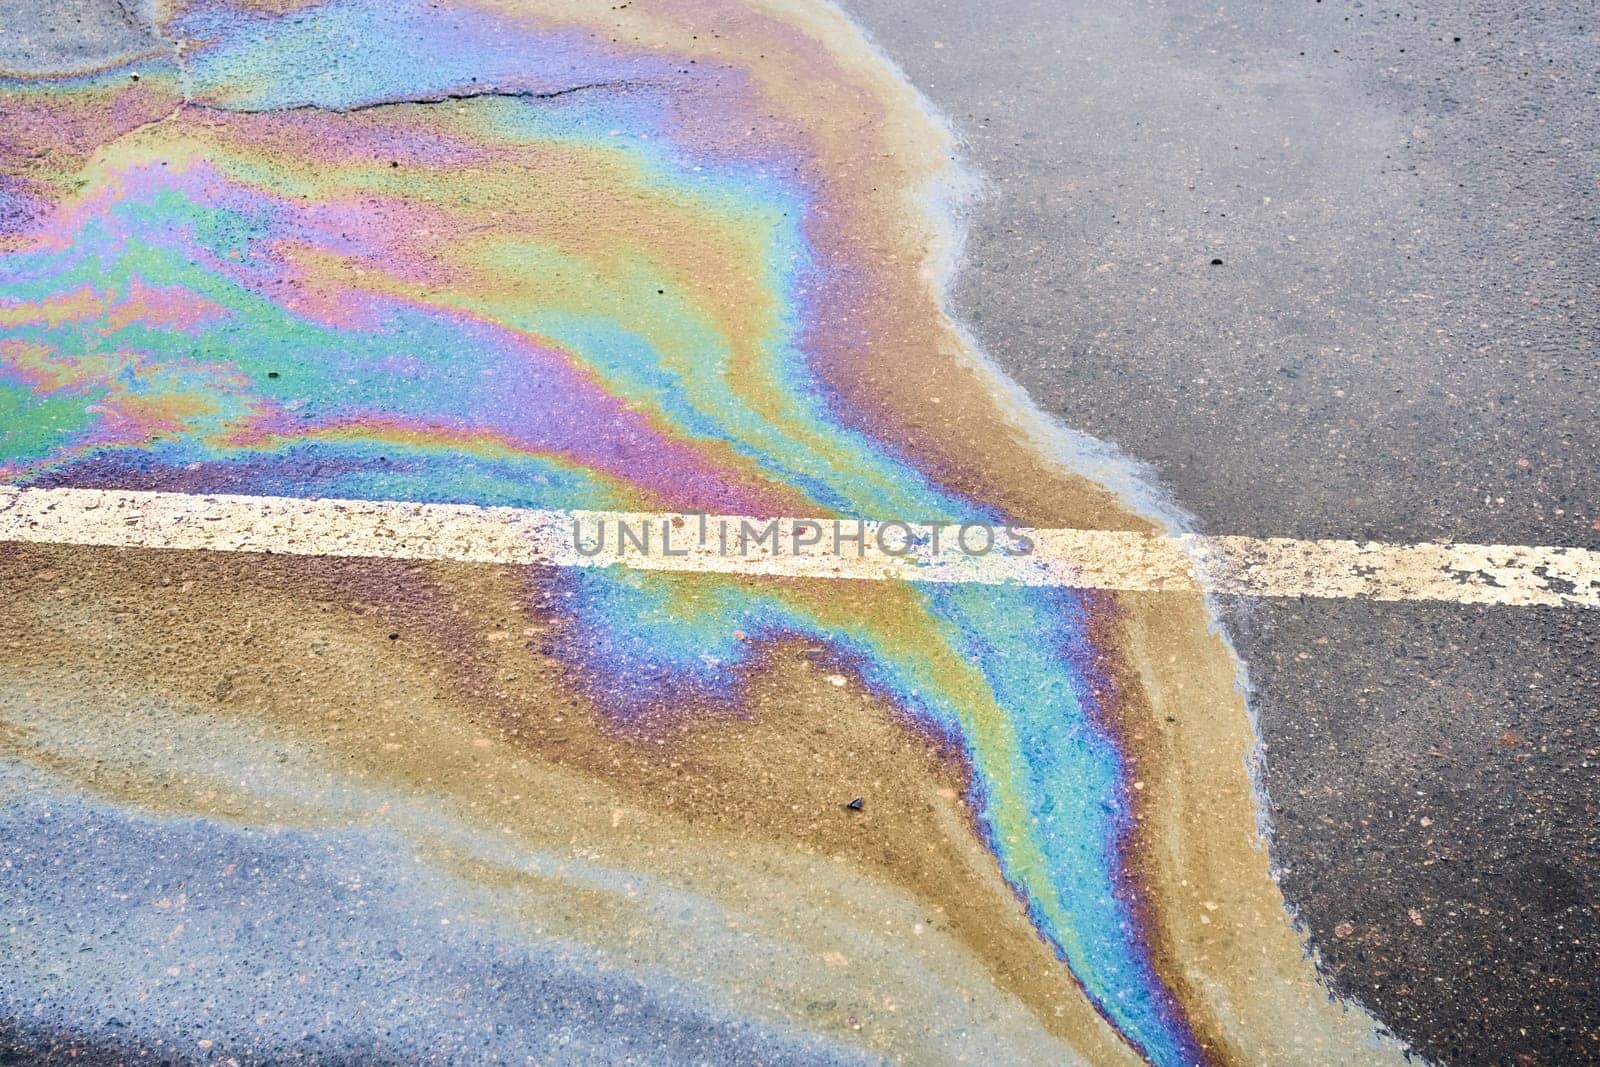 Oil spillage on wet pavement, parking lot with dividing lines, underscoring the environmental obstacles tied to water pollution.